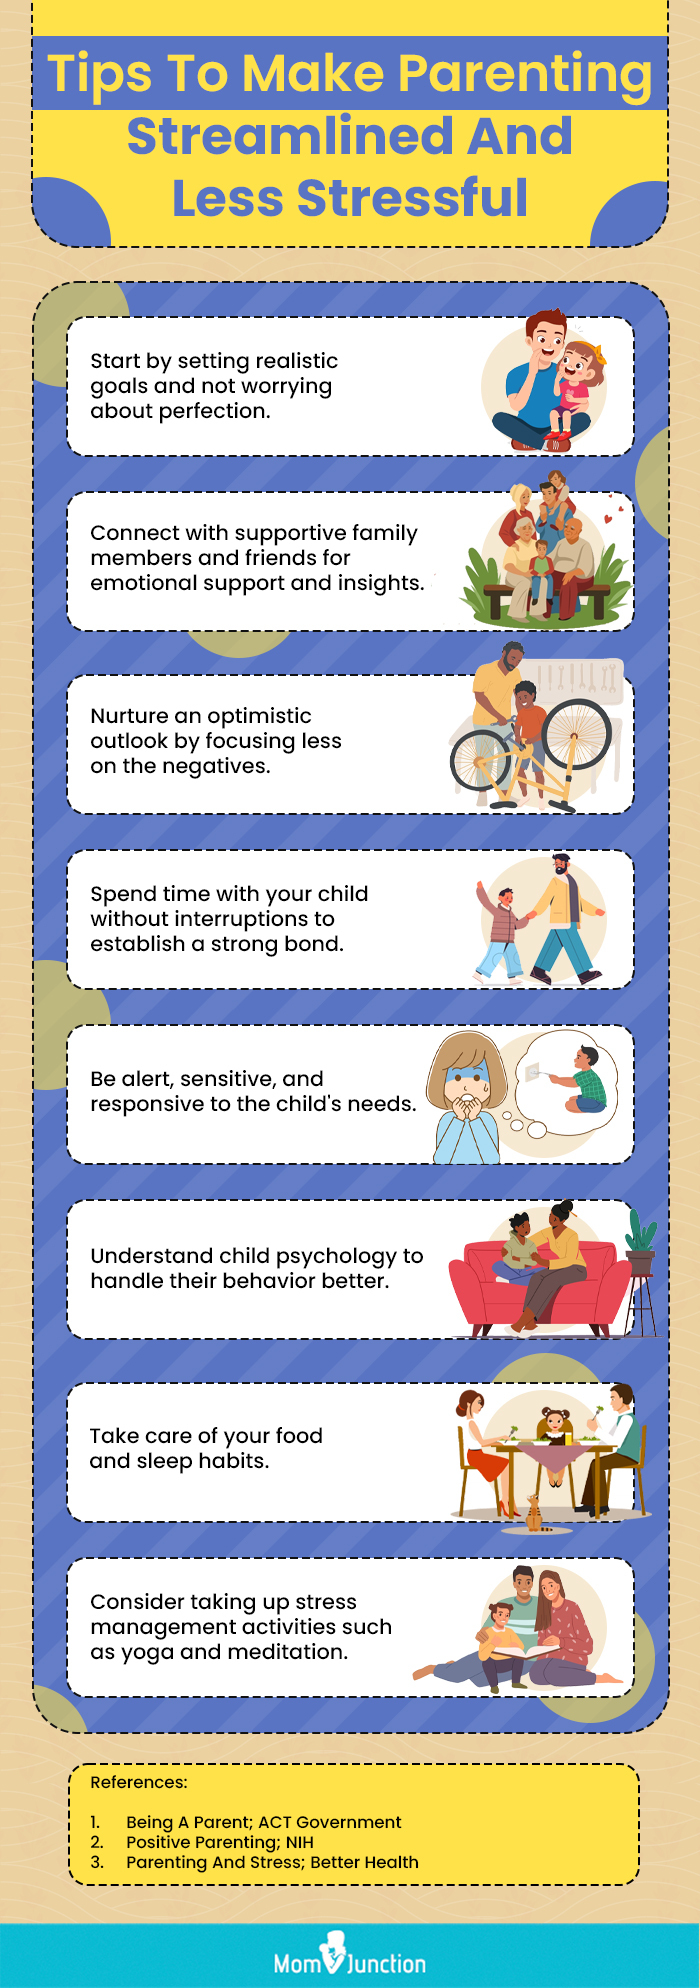 Tips To Make Parenting Streamlined And Less Stressful (infographic)